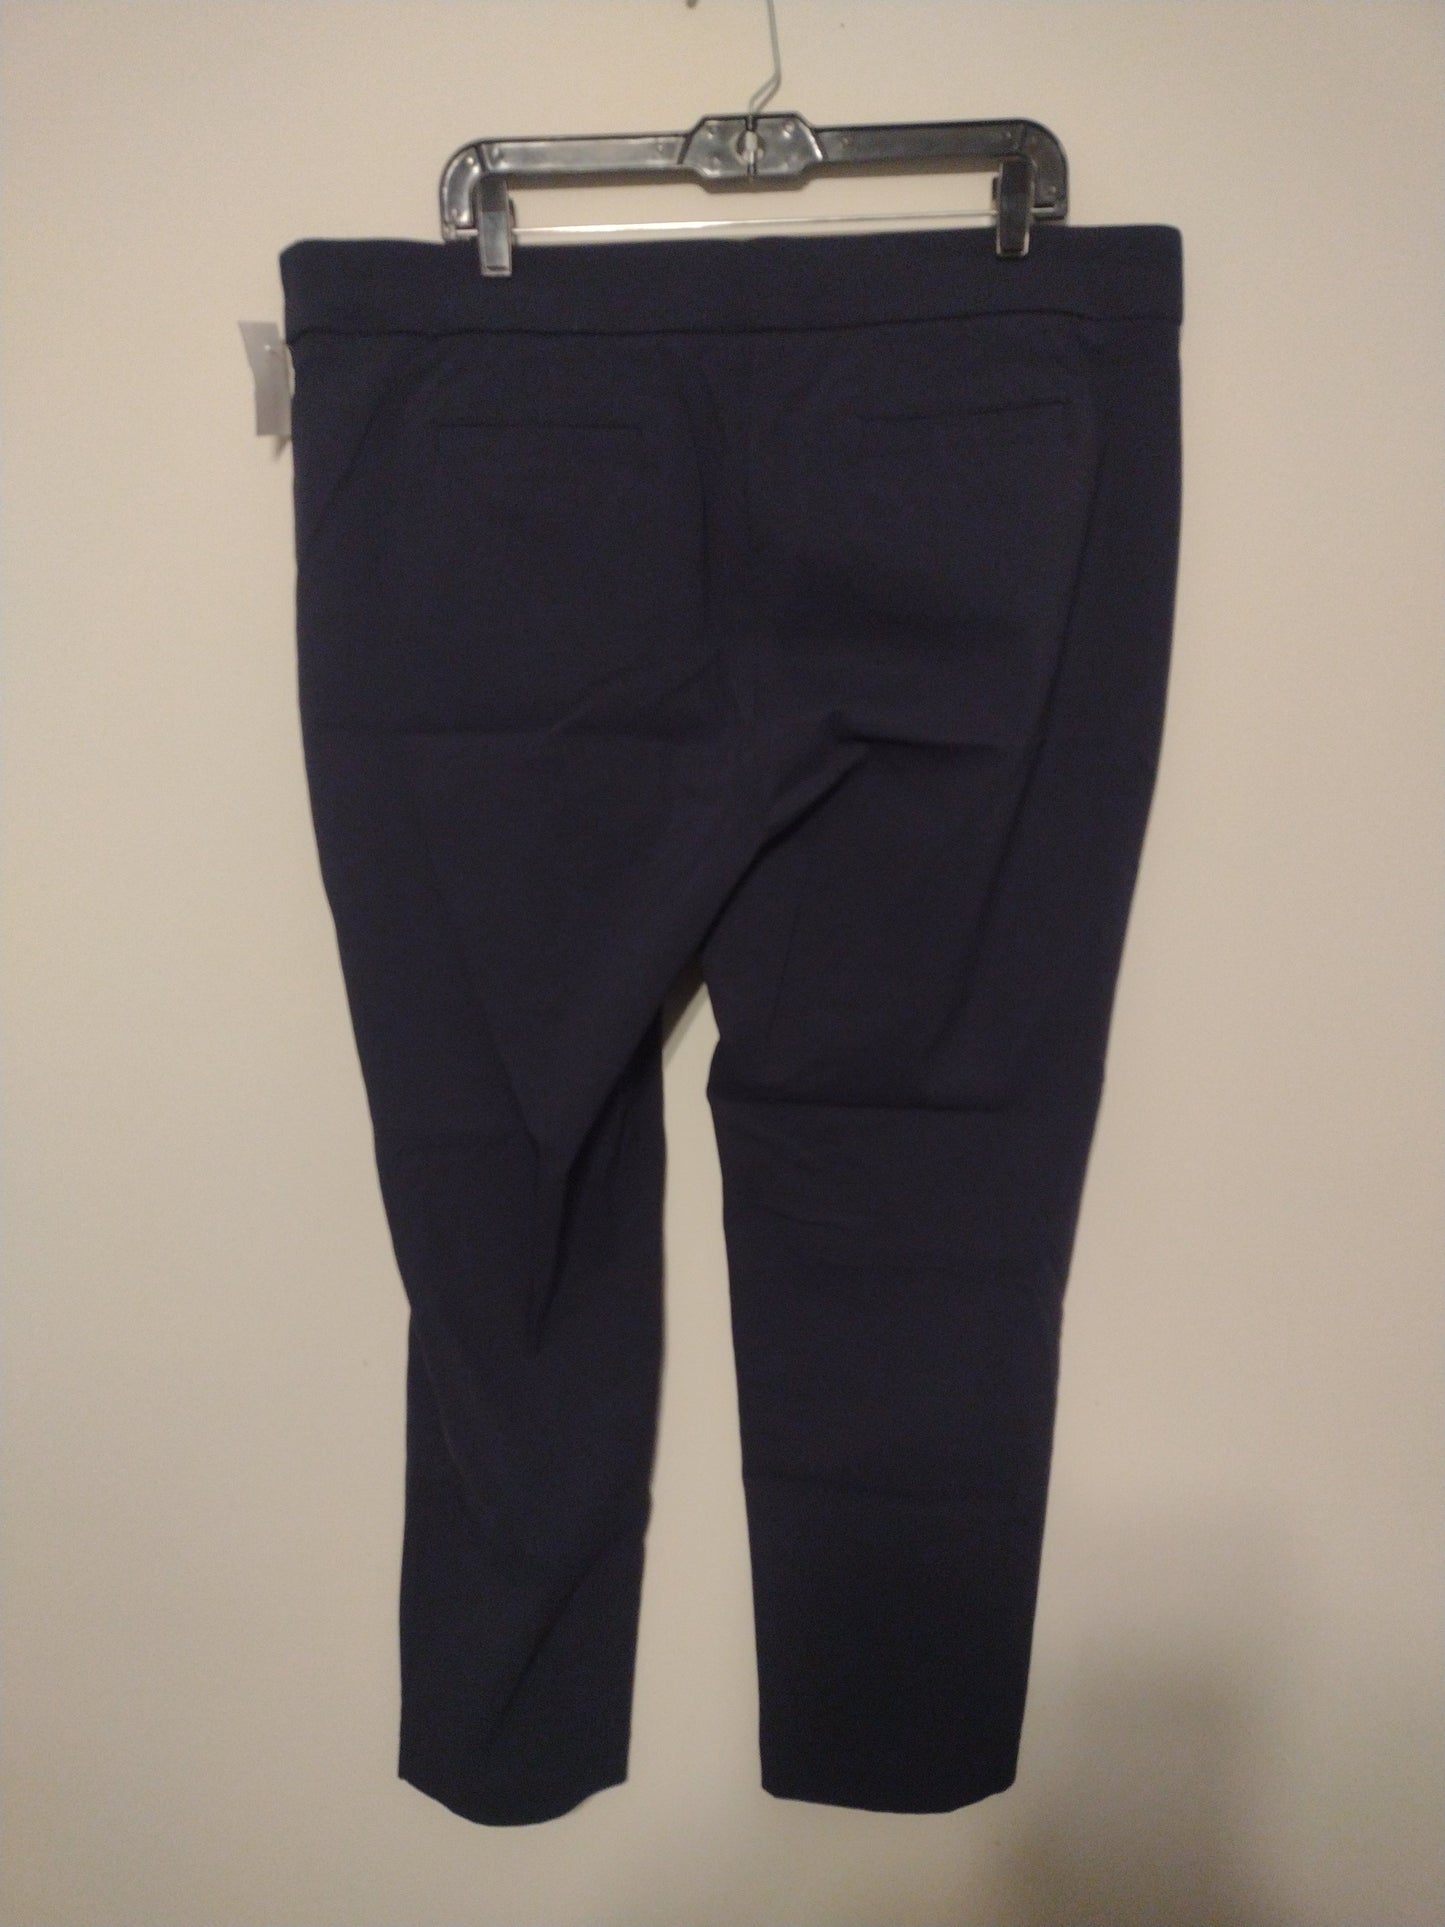 Pants Ankle By Kim Rogers  Size: 1x